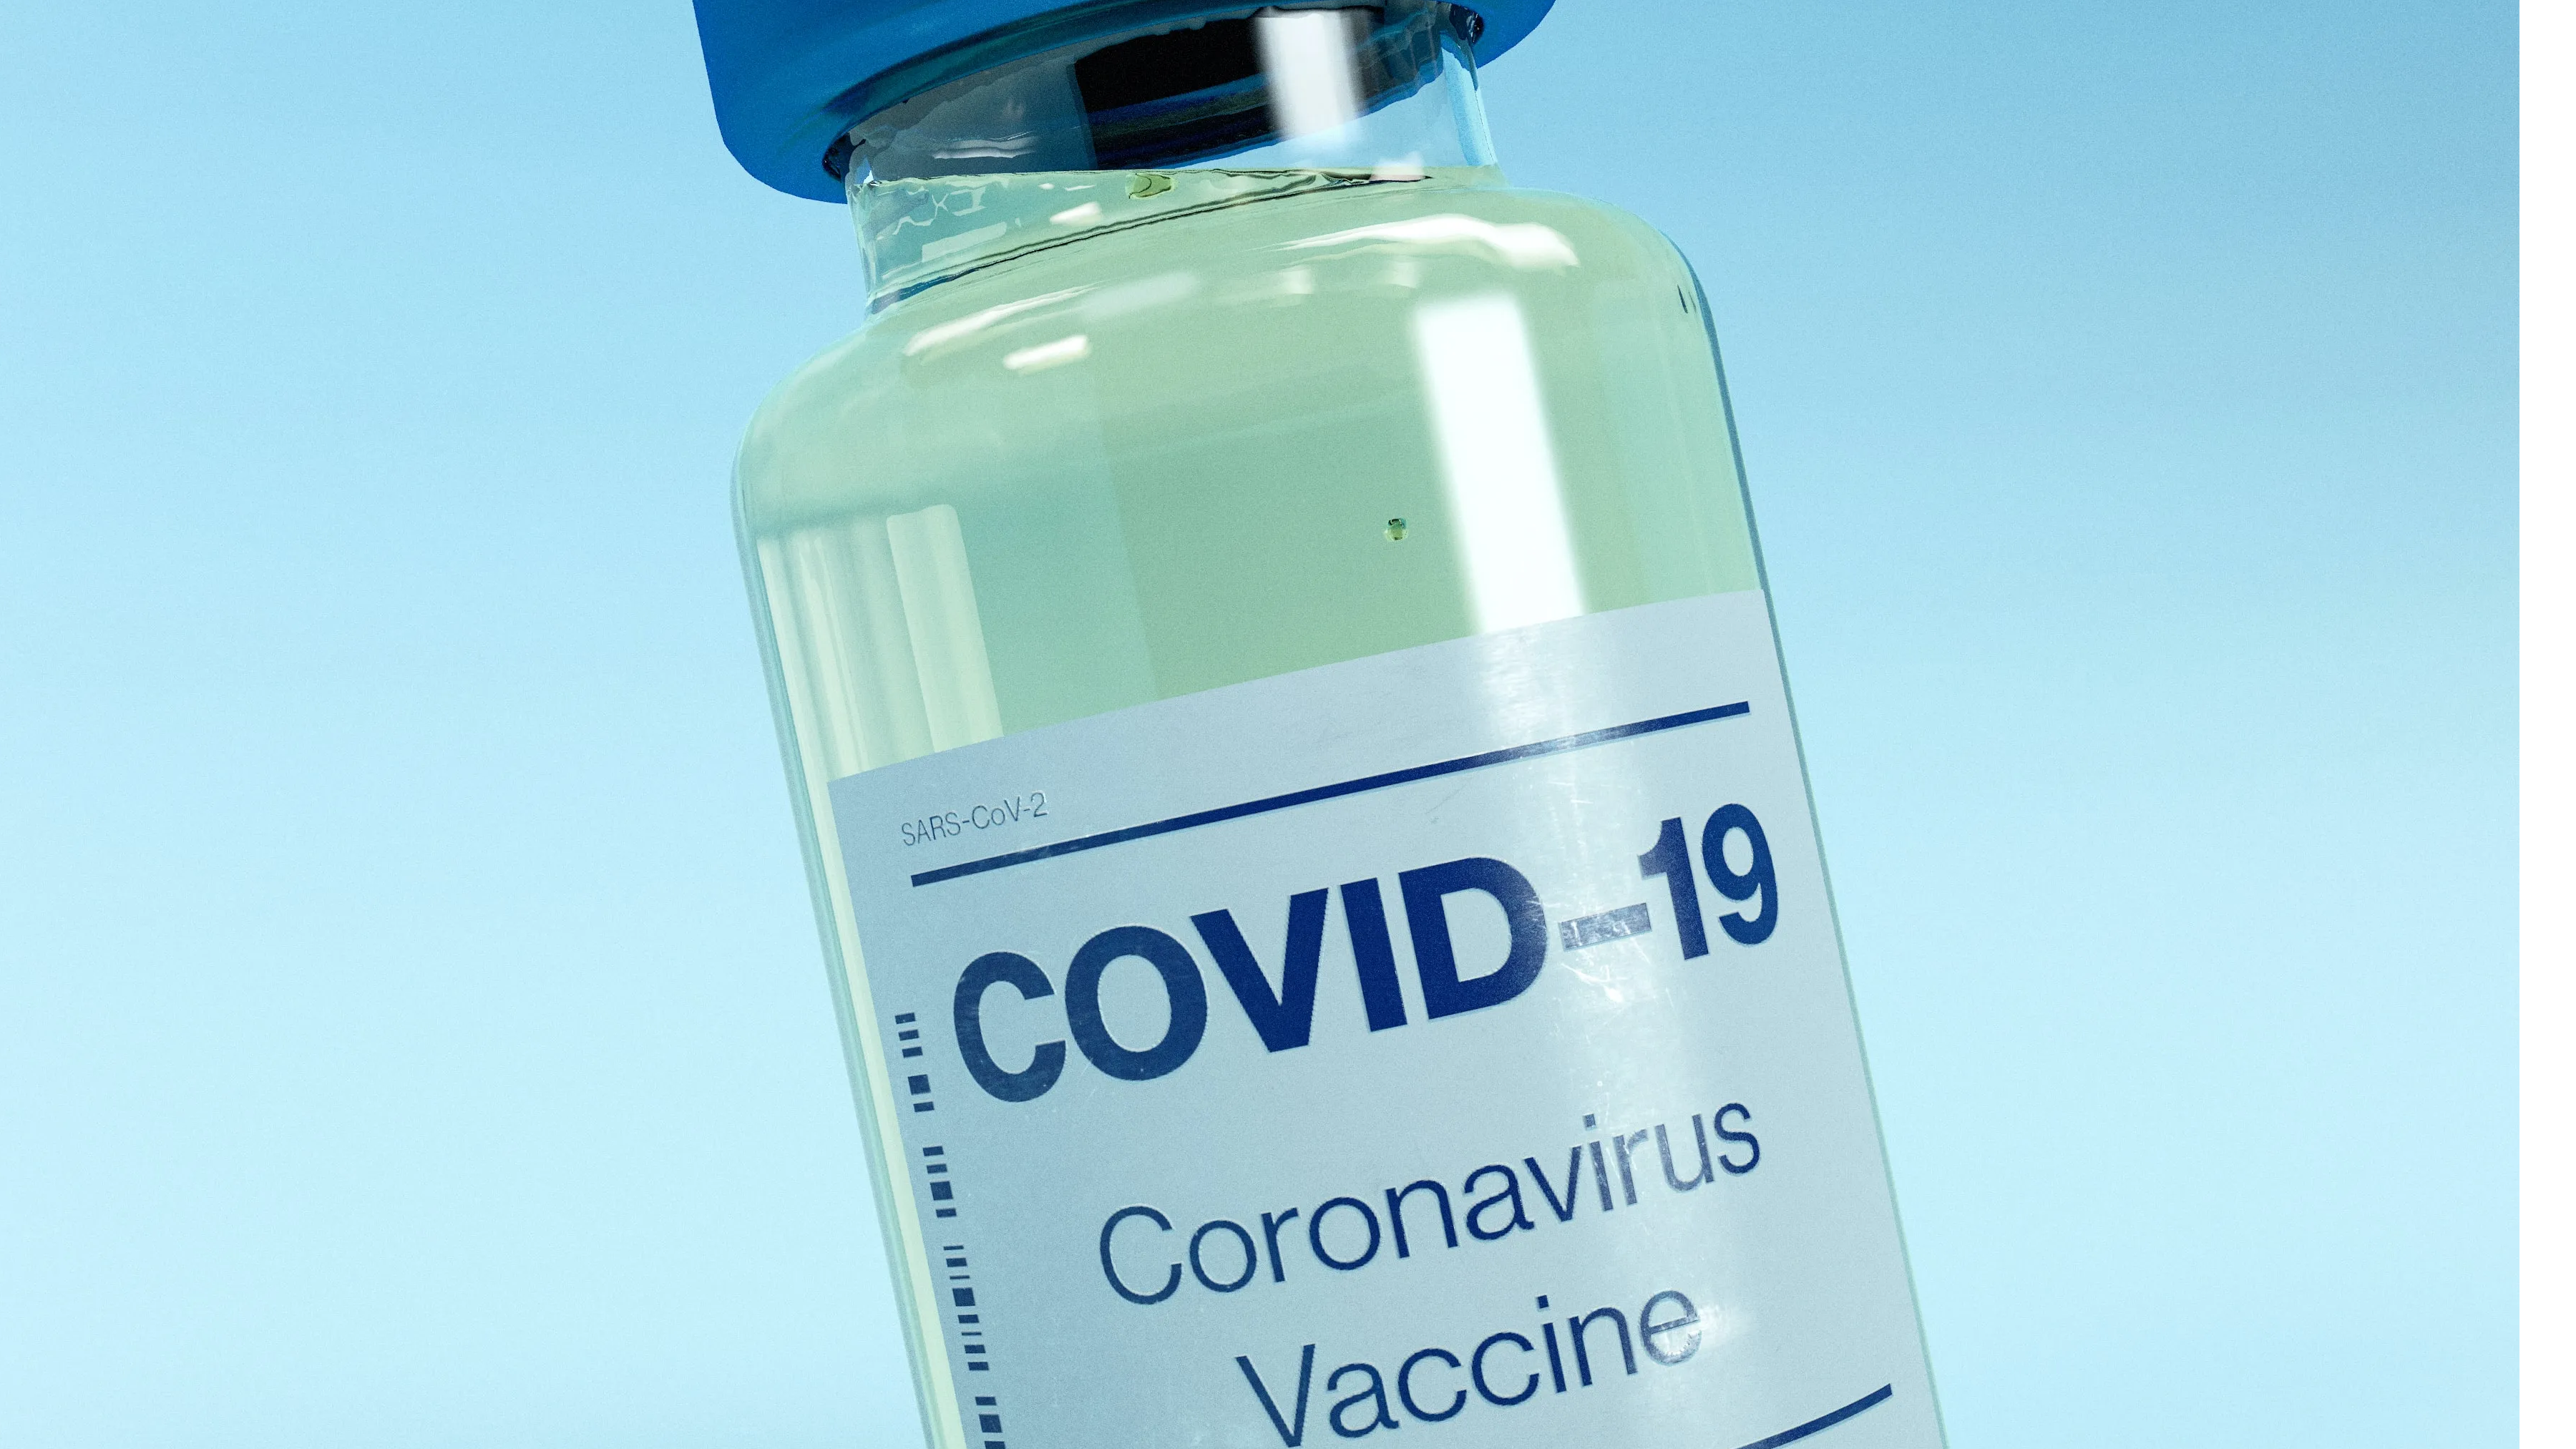 Moderna’s COVID-19 vaccine may roll out next week as US experts meet today